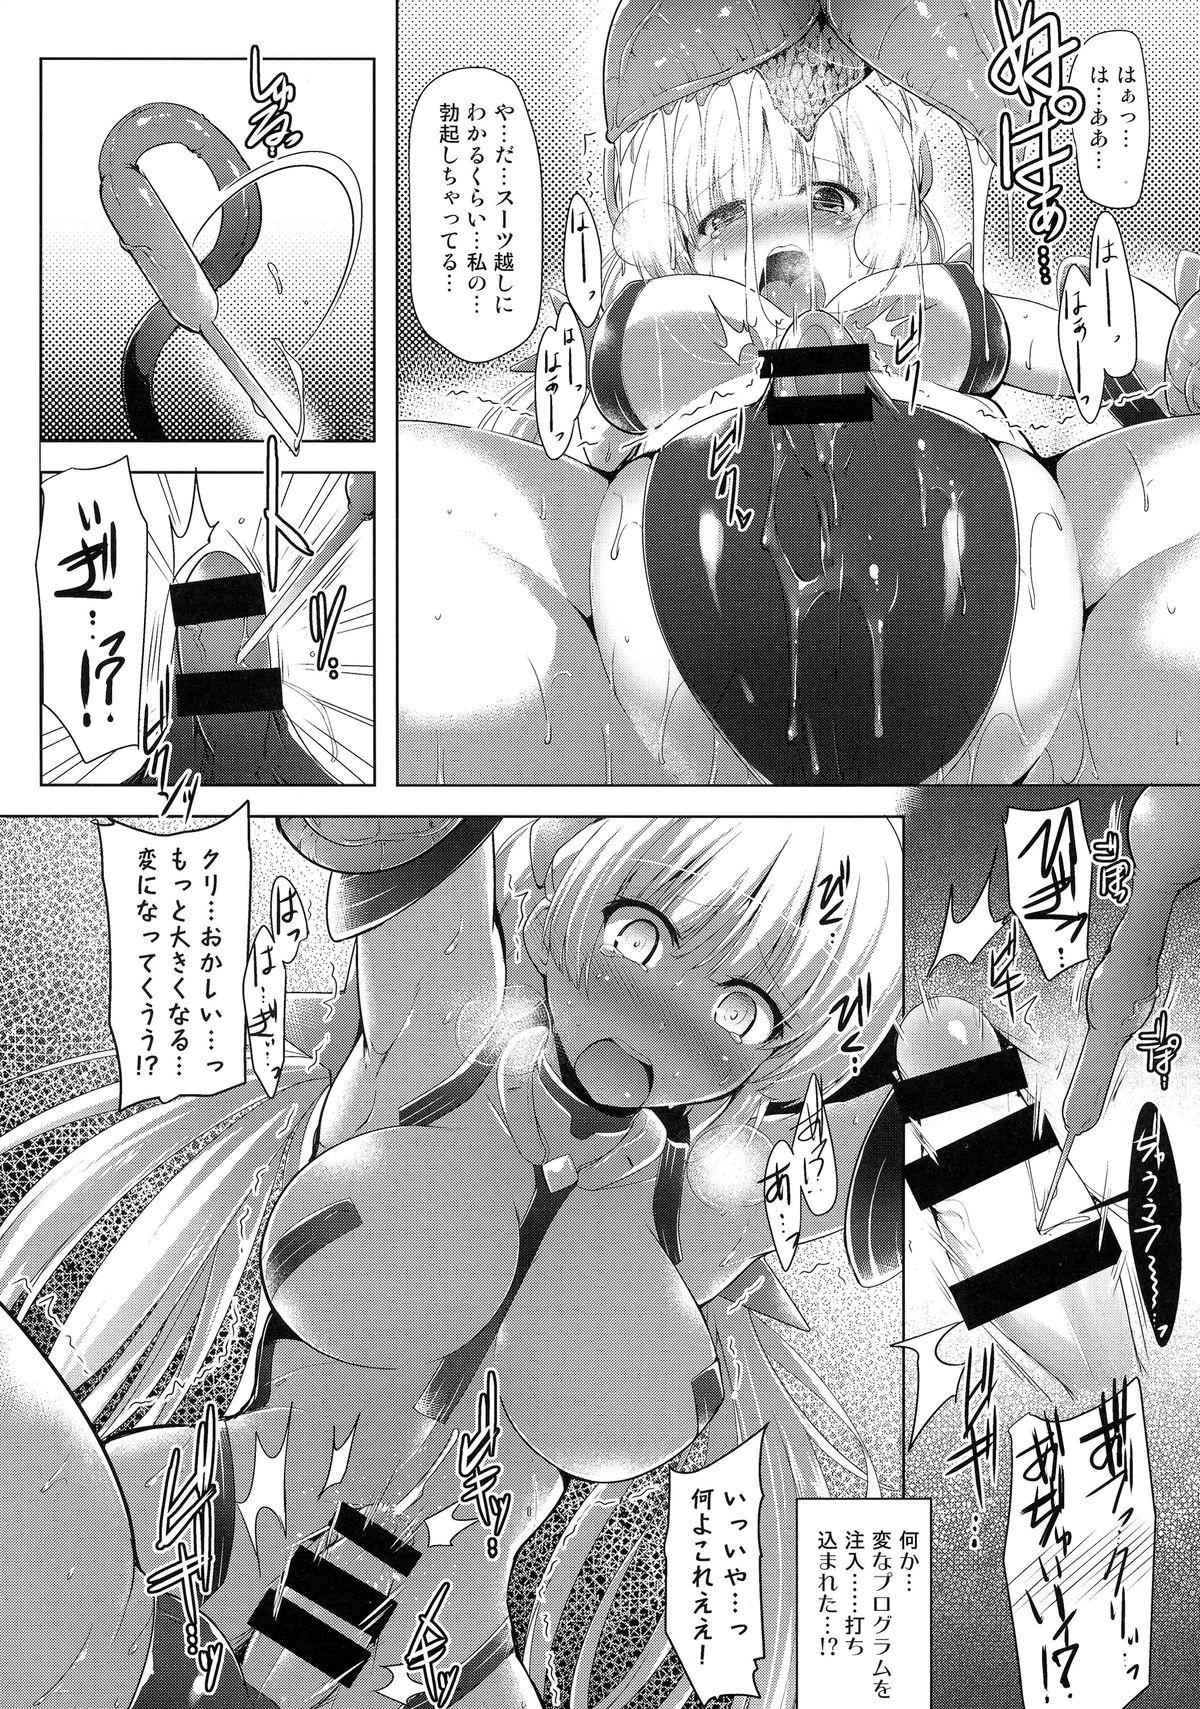 Bedroom K.231 - Expelled from paradise Erotica - Page 8